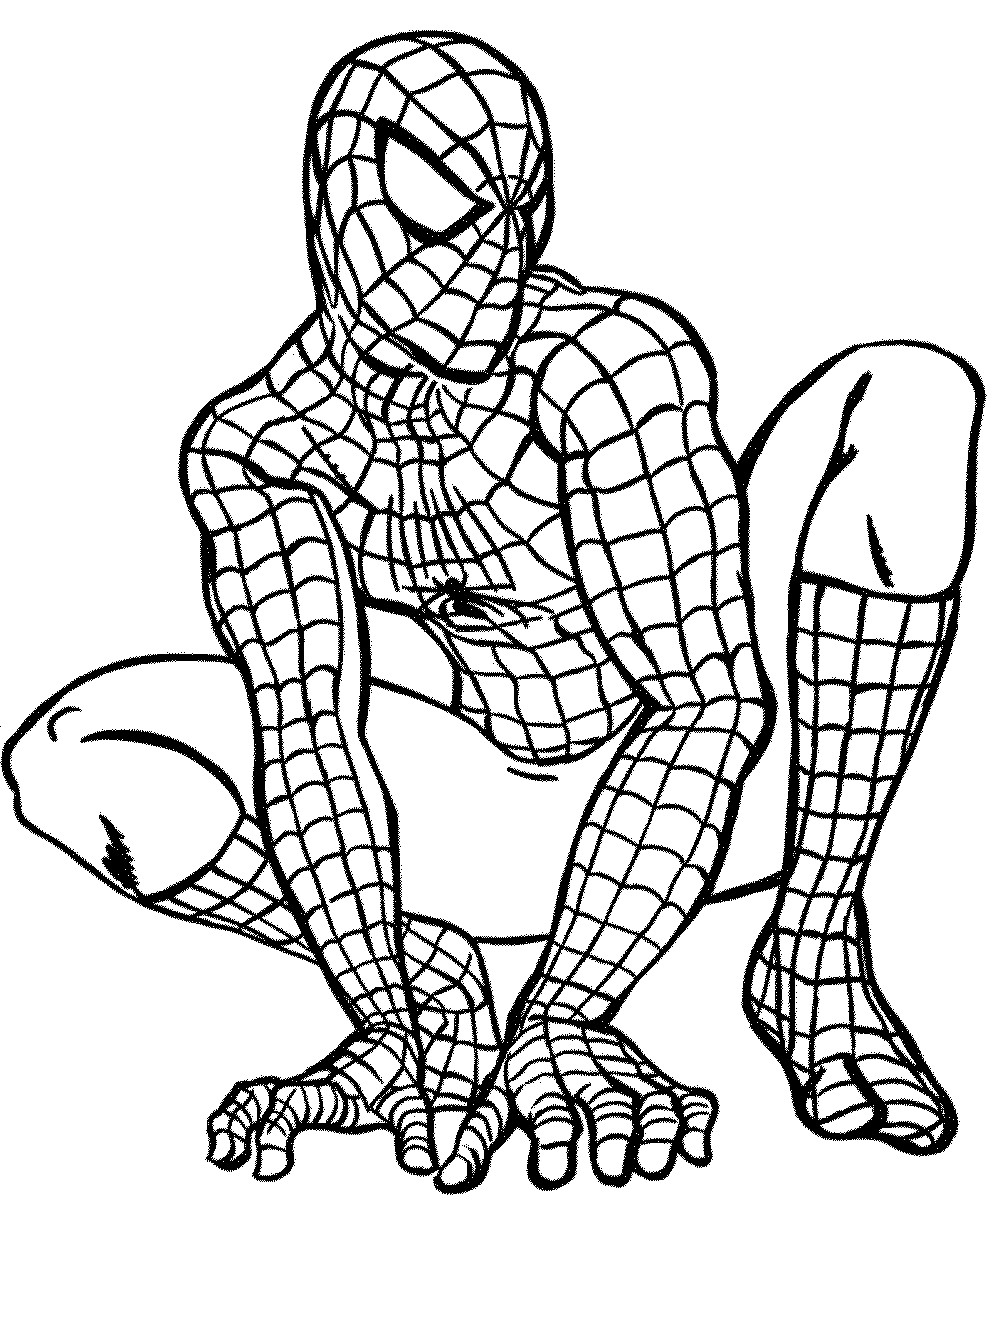 Spiderman Coloring Pages For Kids
 Print & Download Spiderman Coloring Pages An Enjoyable